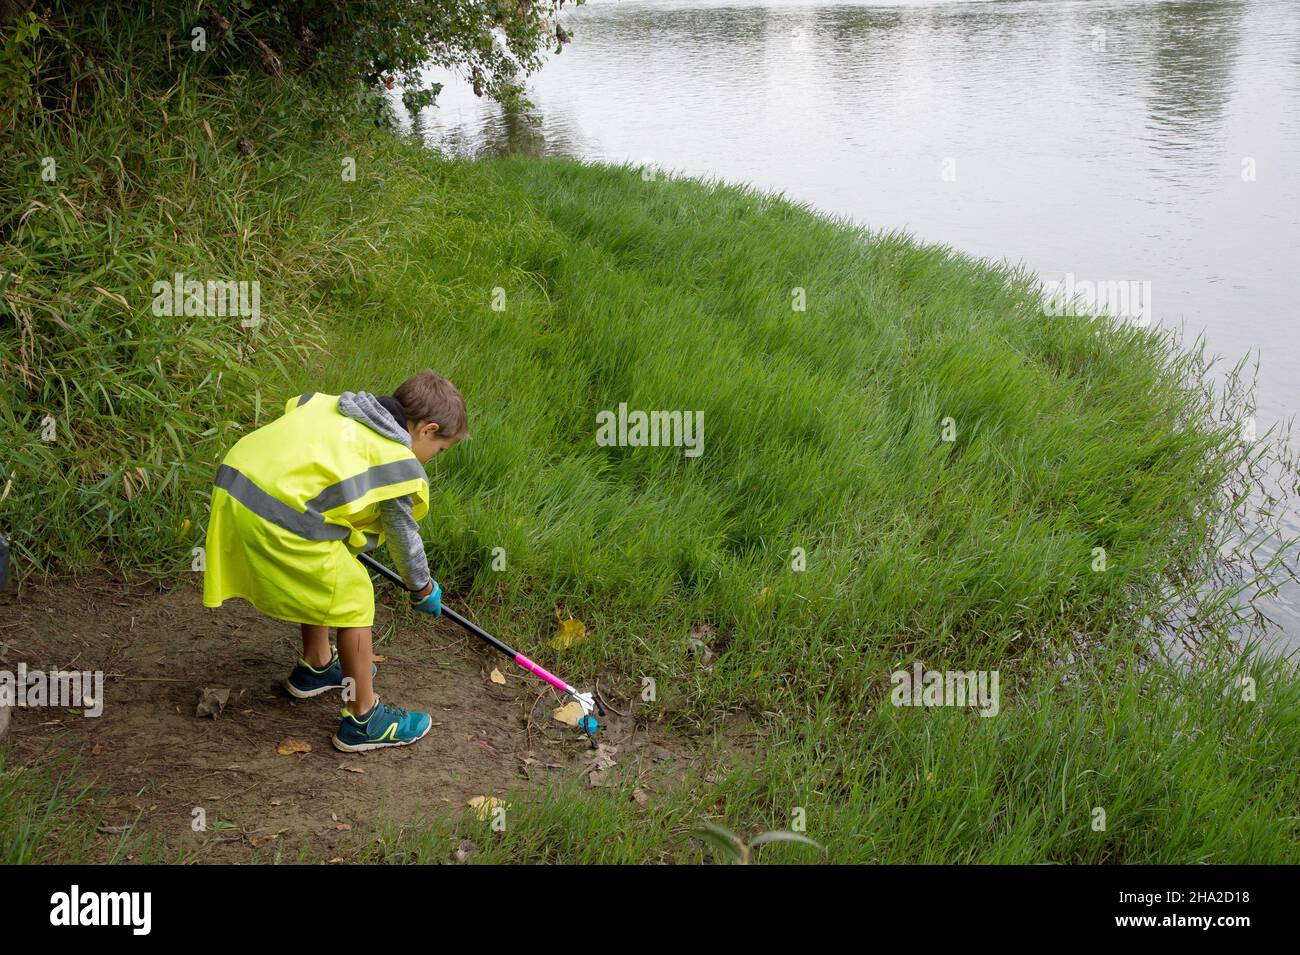 Clean-up operation by the Garonne River in Blagnac, on September 18, 2021. Child, litter-picker a wearing fluorescent yellow vest picking up litter th Stock Photo